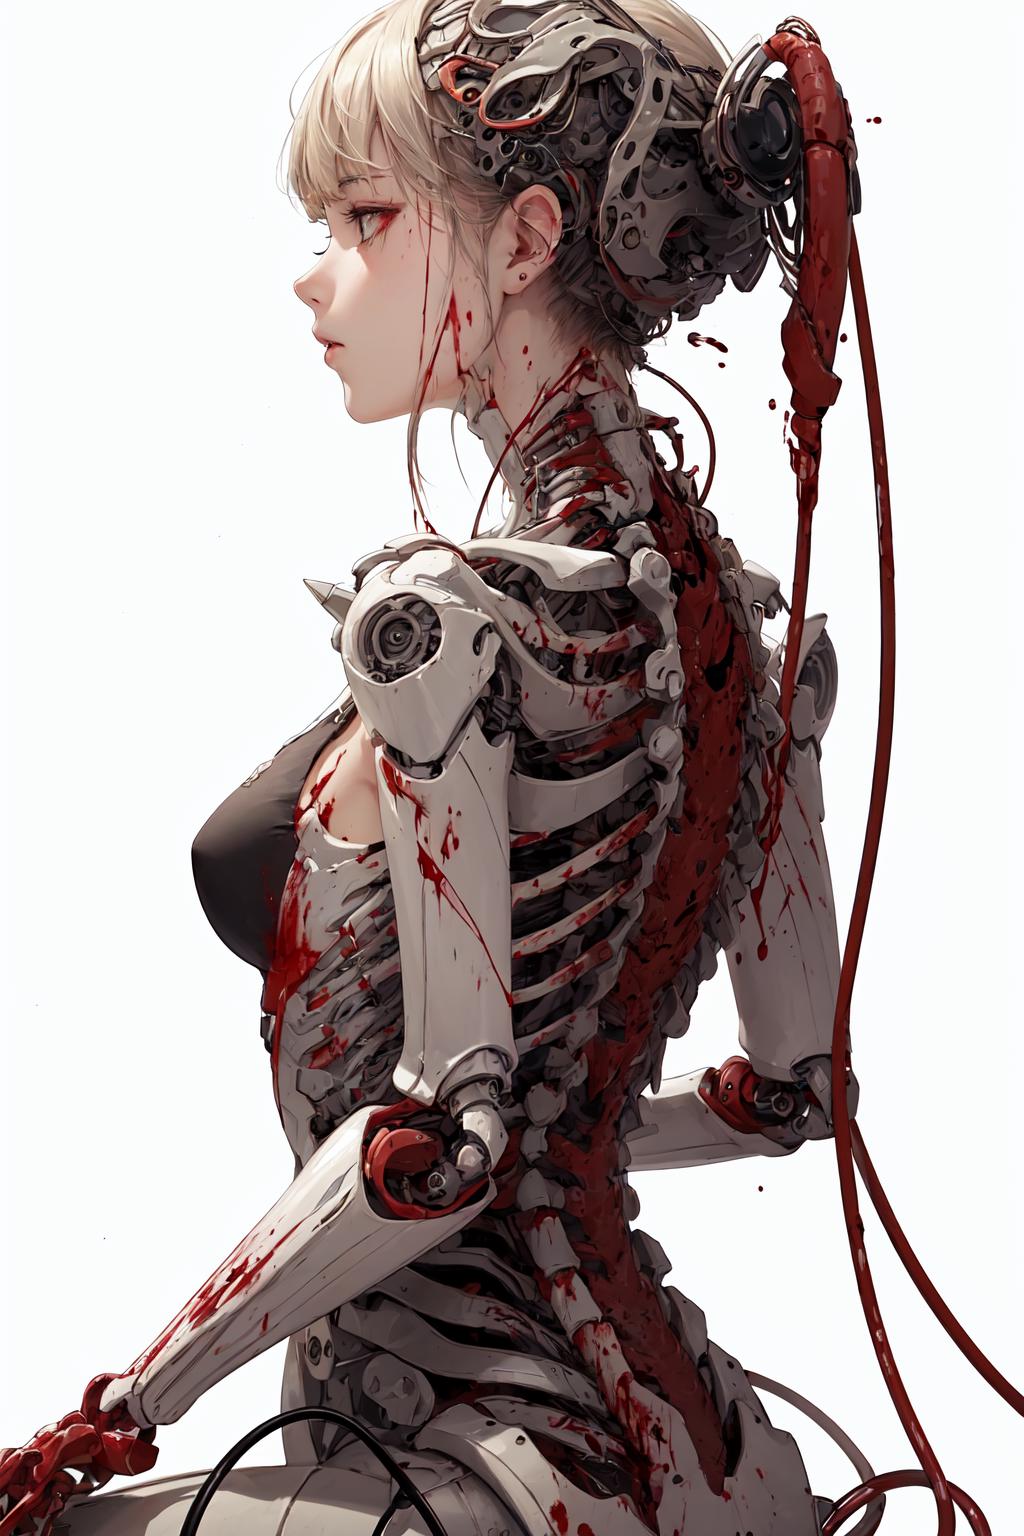 A robot with blood on its arm and a woman's face on its back.